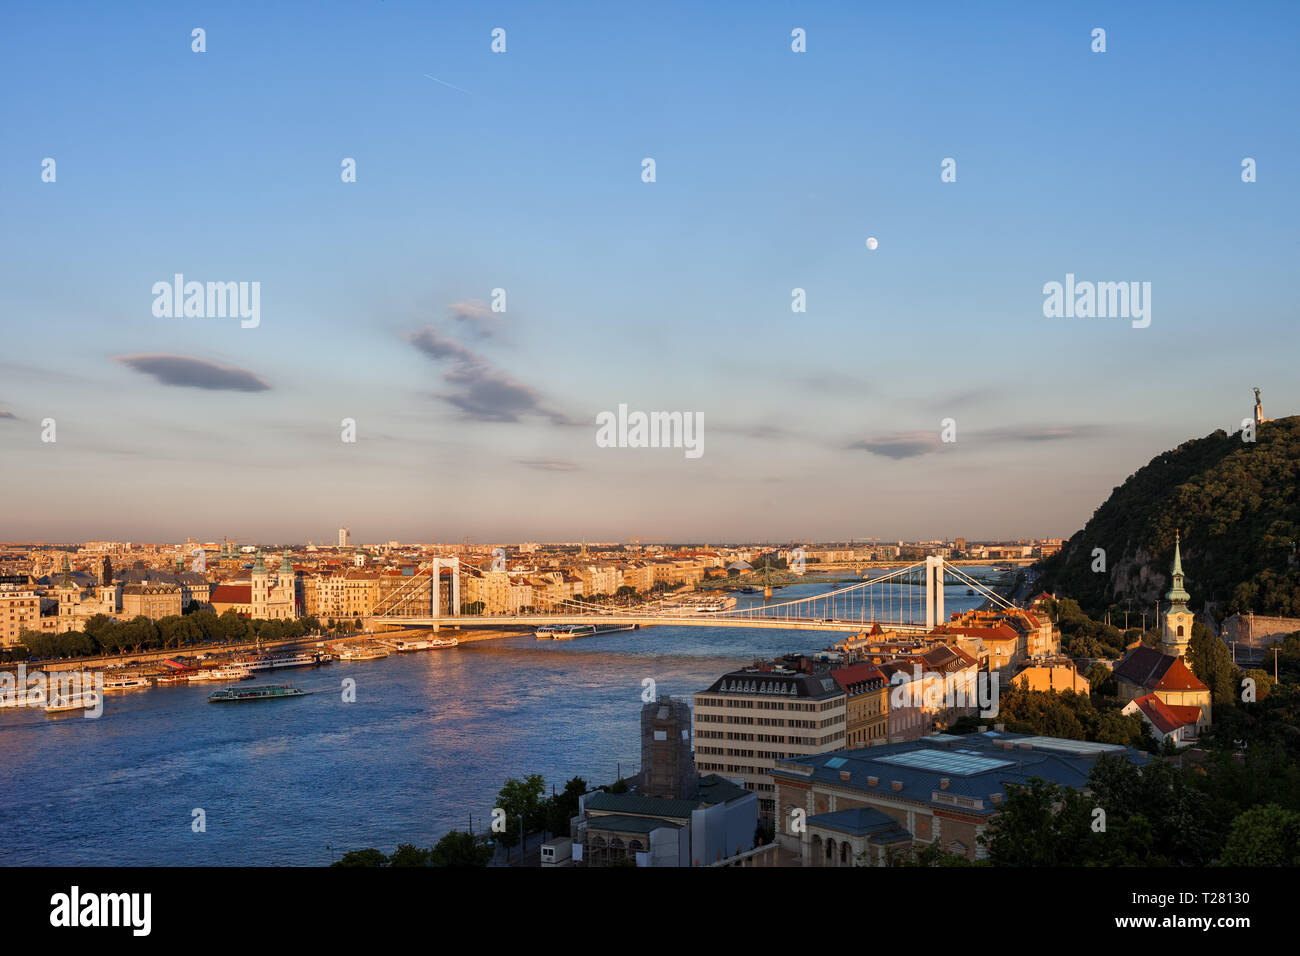 Budapest at sunset, capital city of Hungary, cityscape with Danube river and Elizabeth Bridge, view from above. Stock Photo